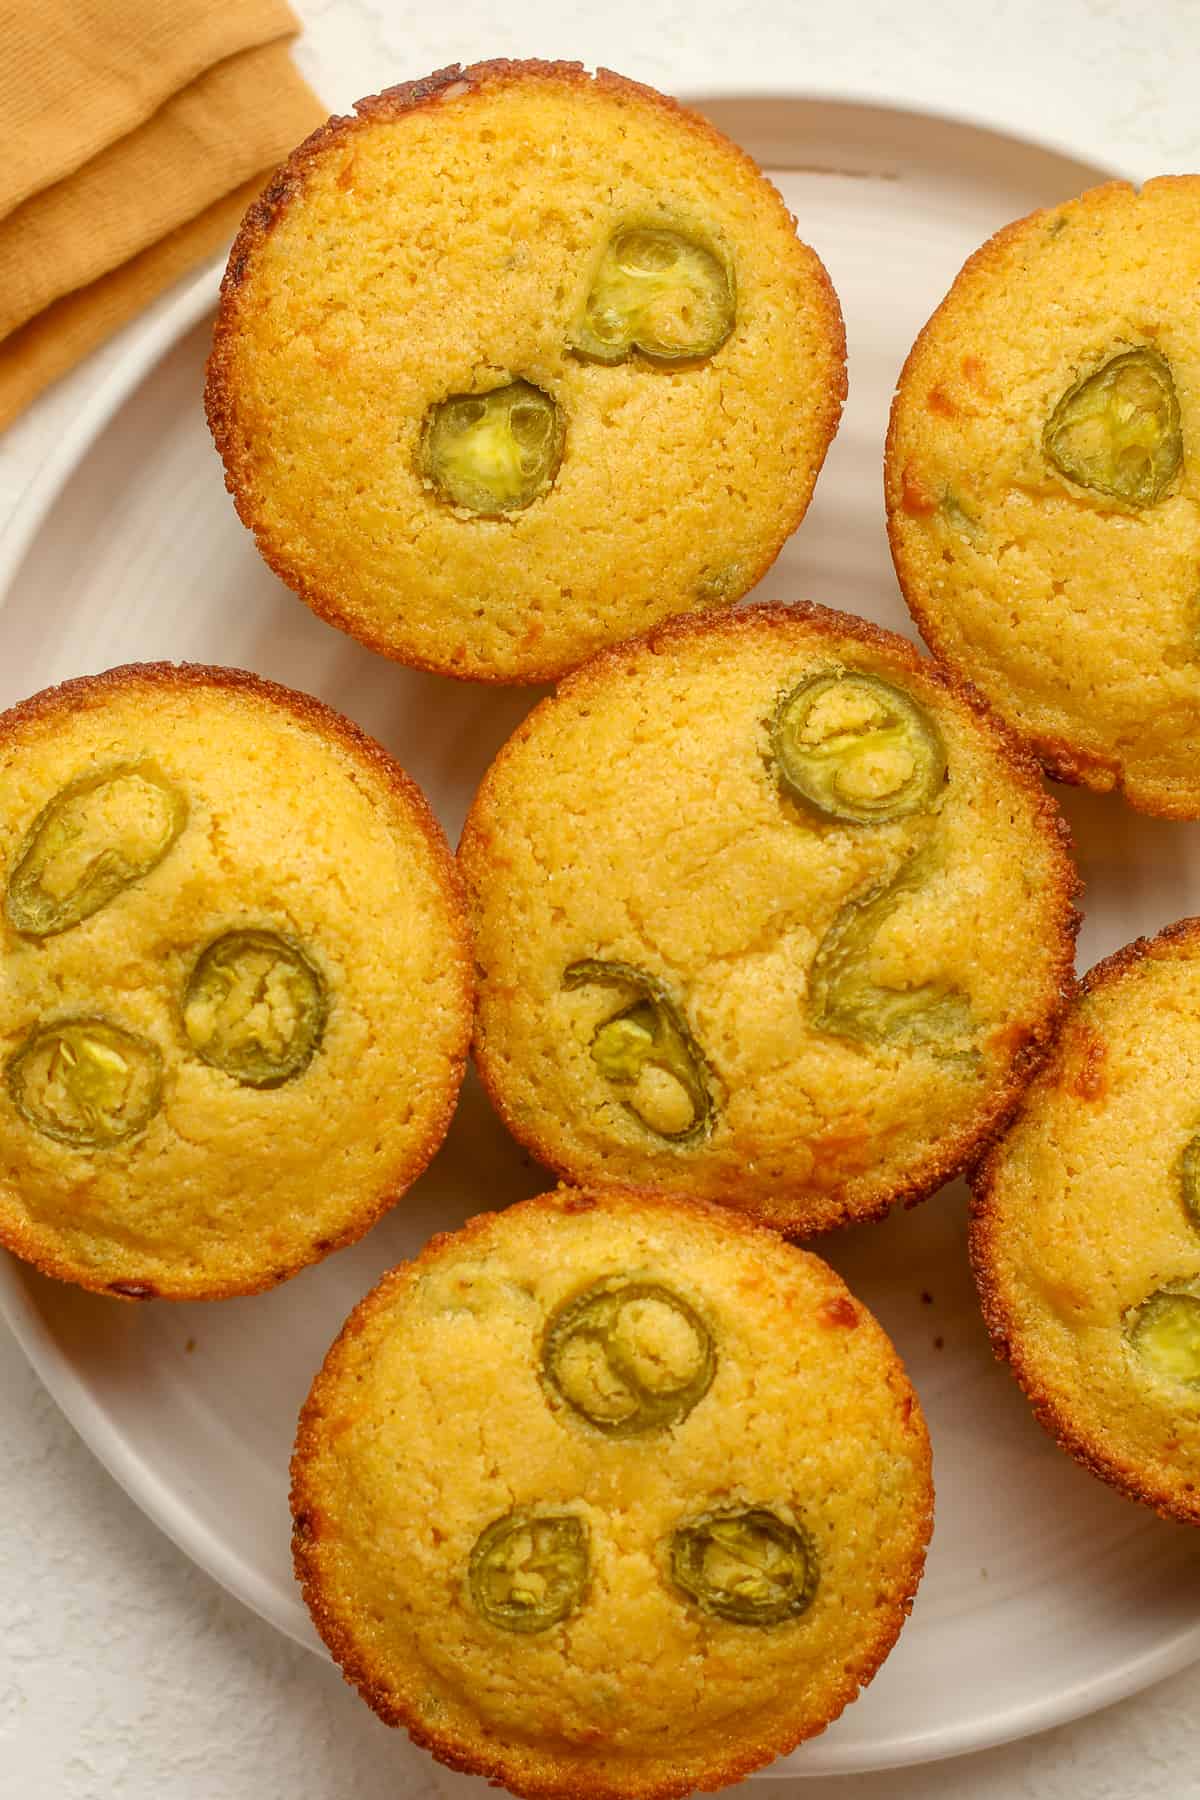 Closeup view of a plate of jalapeno cheddar muffins.